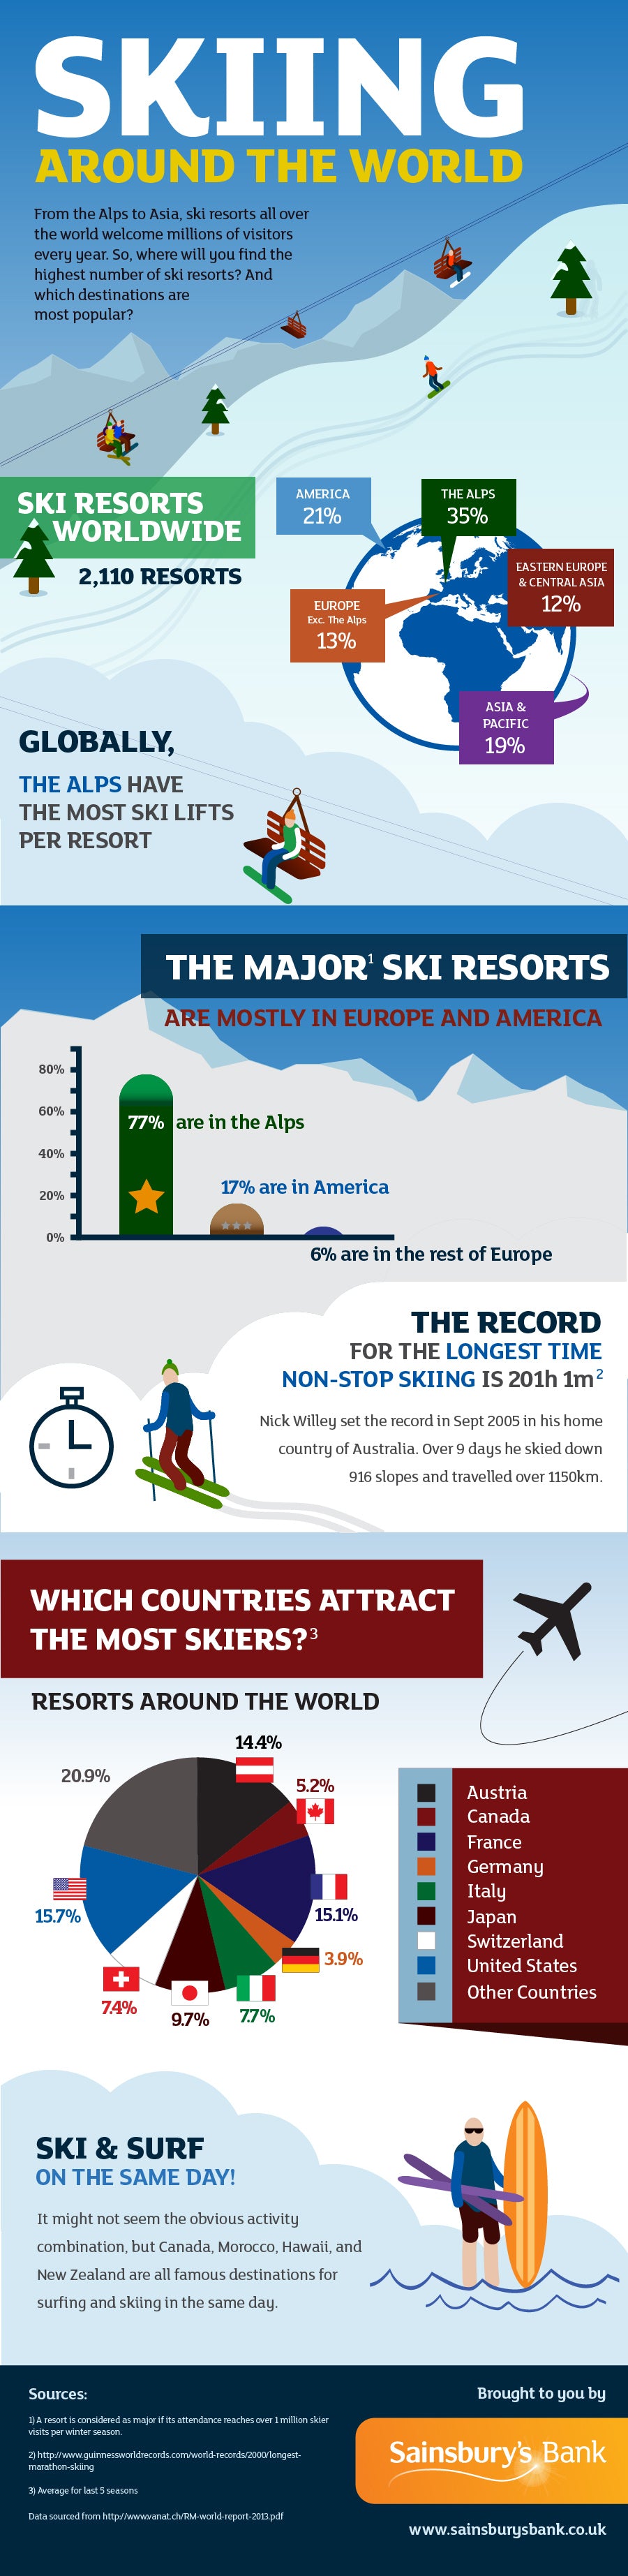 Skiing - Fascinating Facts